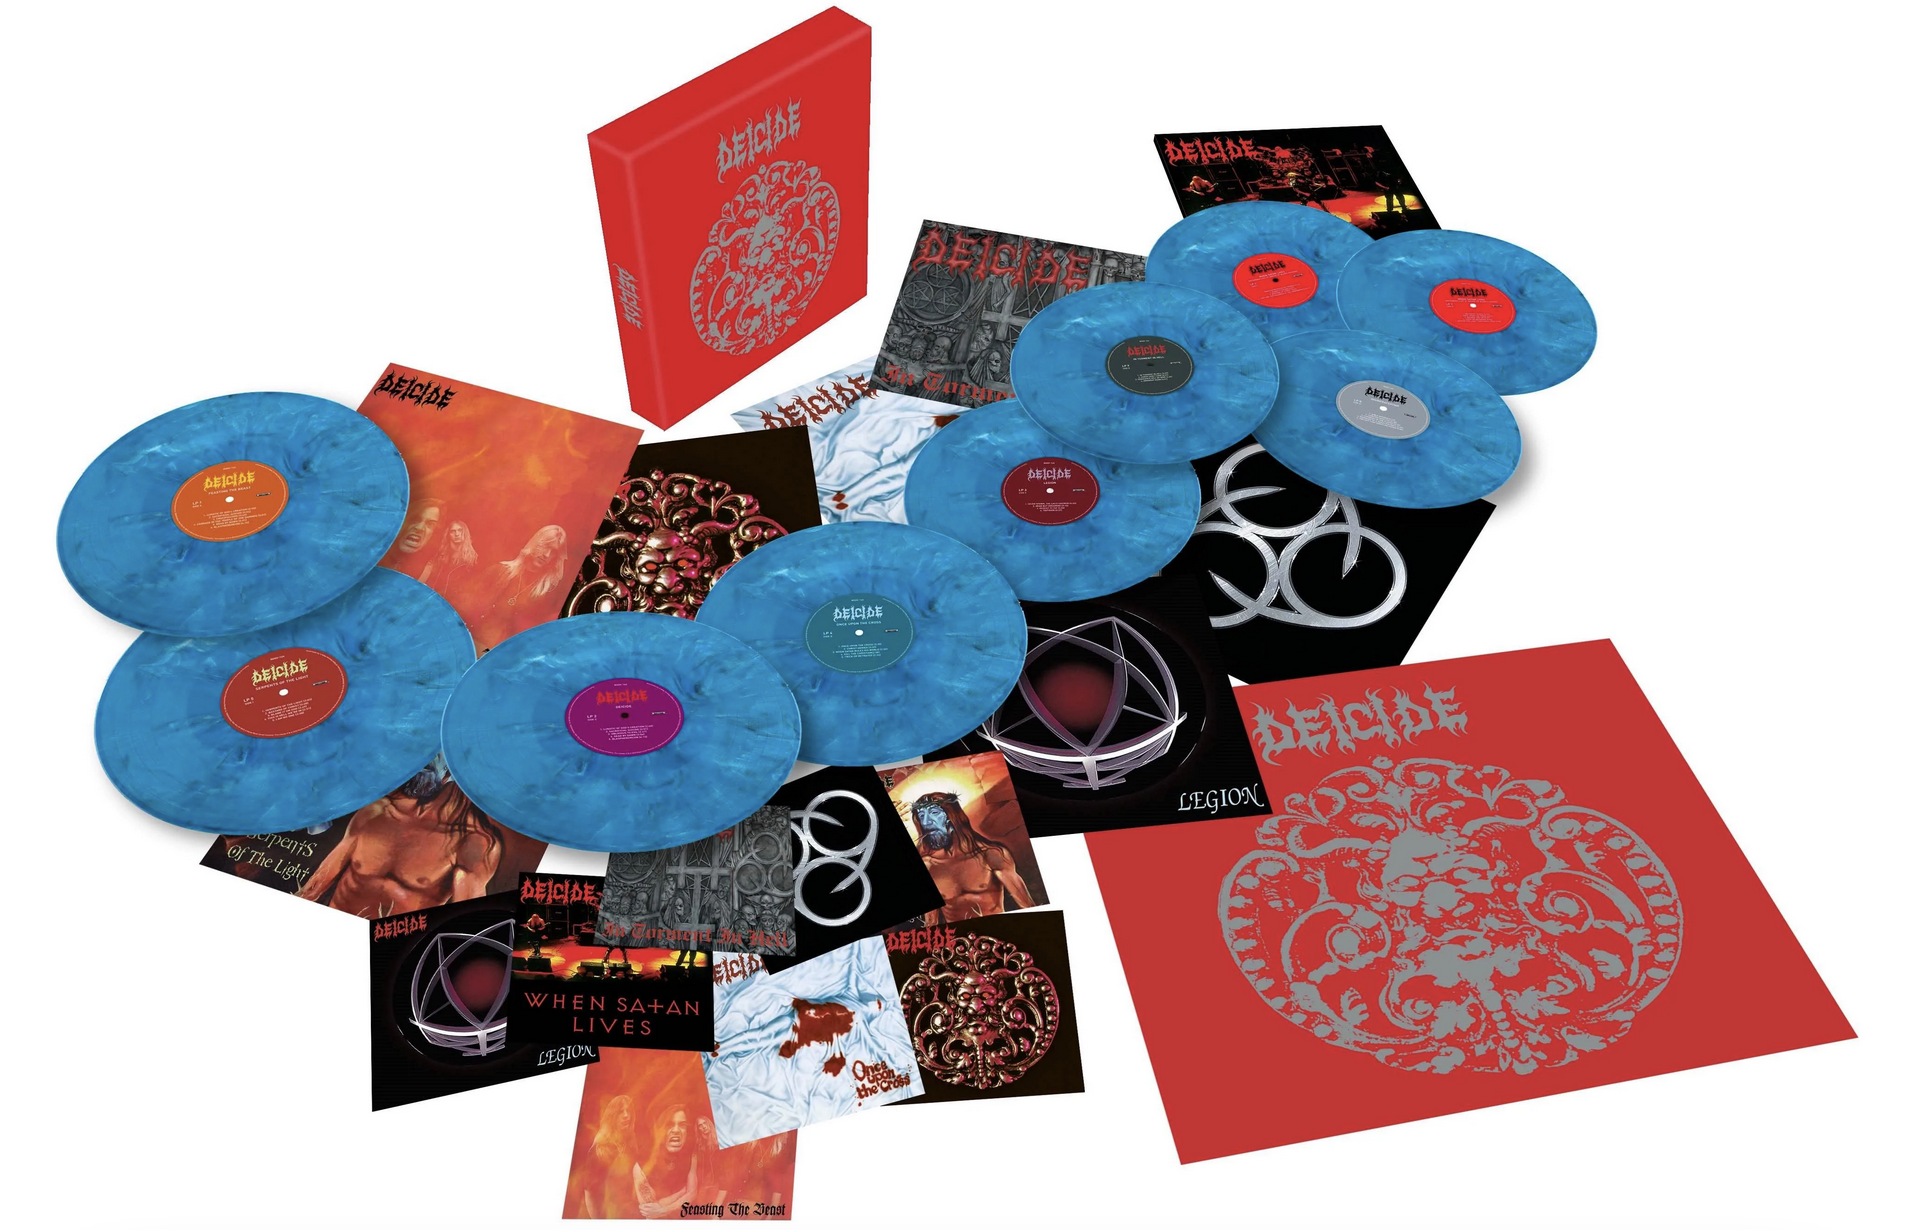 Check Out The Metal Injection Exclusive DEICIDE Vinyl Box Set Variant At Our New Web Store